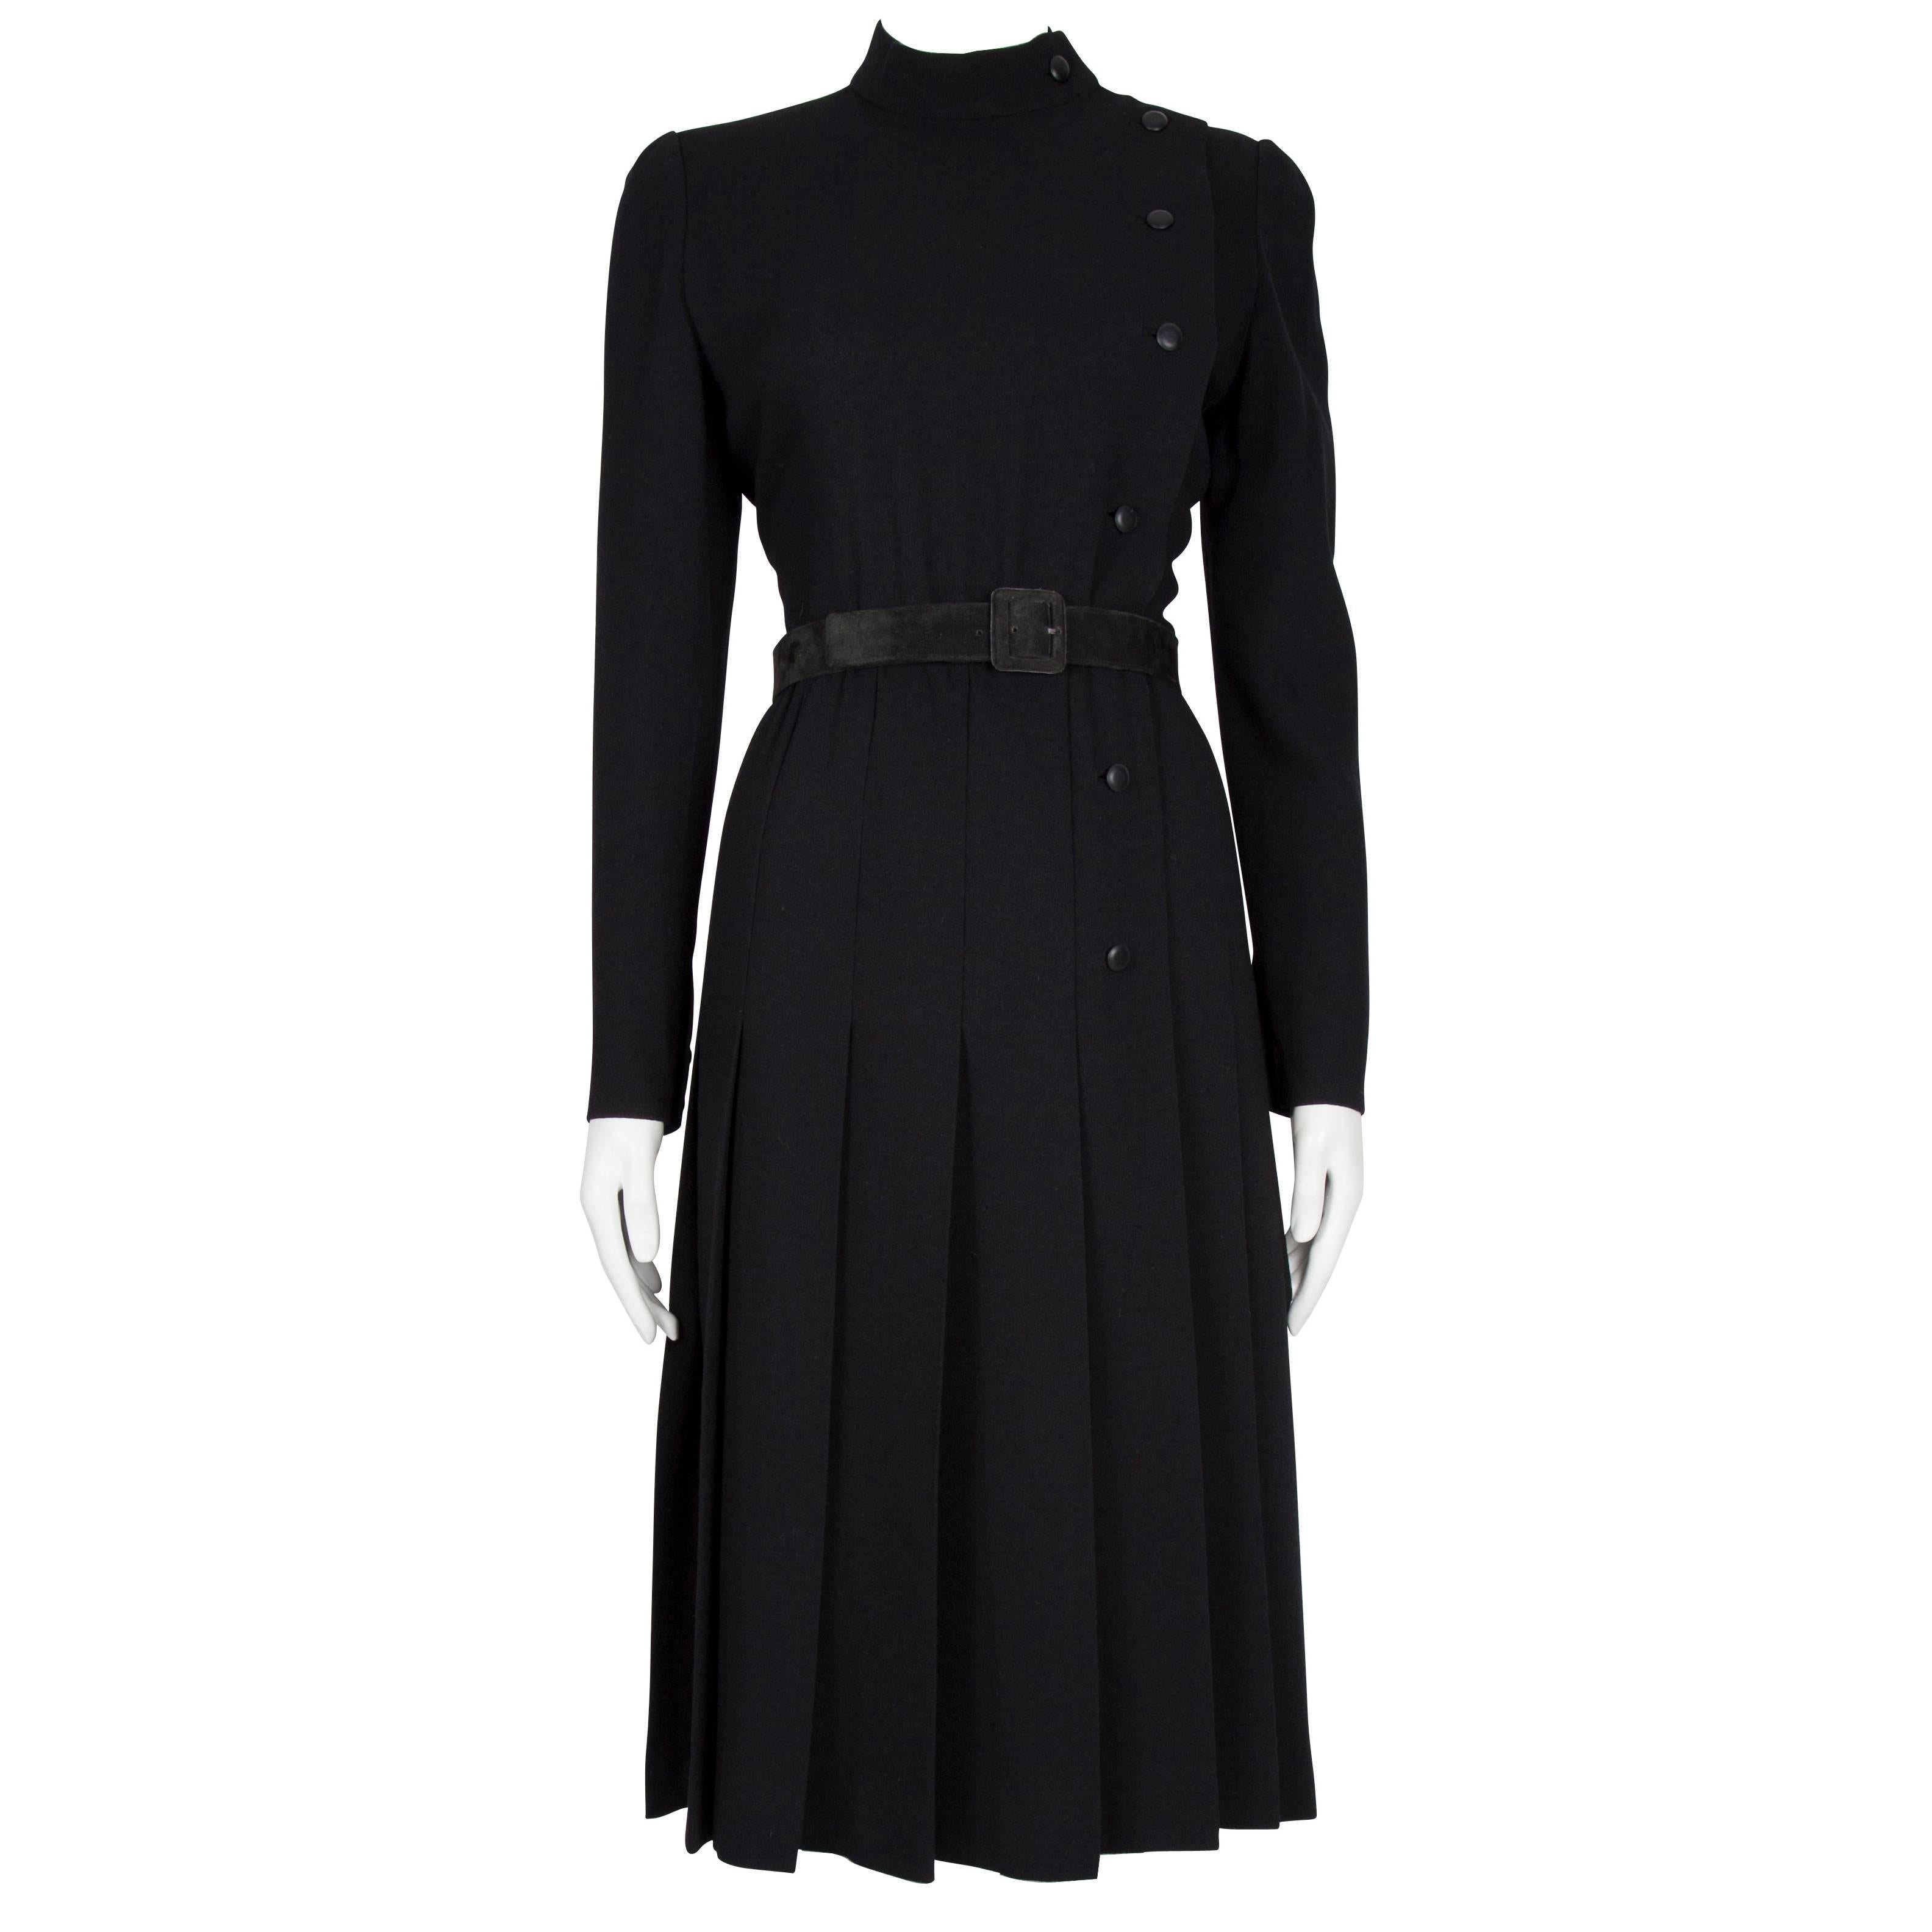 A/W 1979 Dior Couture Black Silk Crepe Button-Down Wrap Dress with Suede Belt For Sale